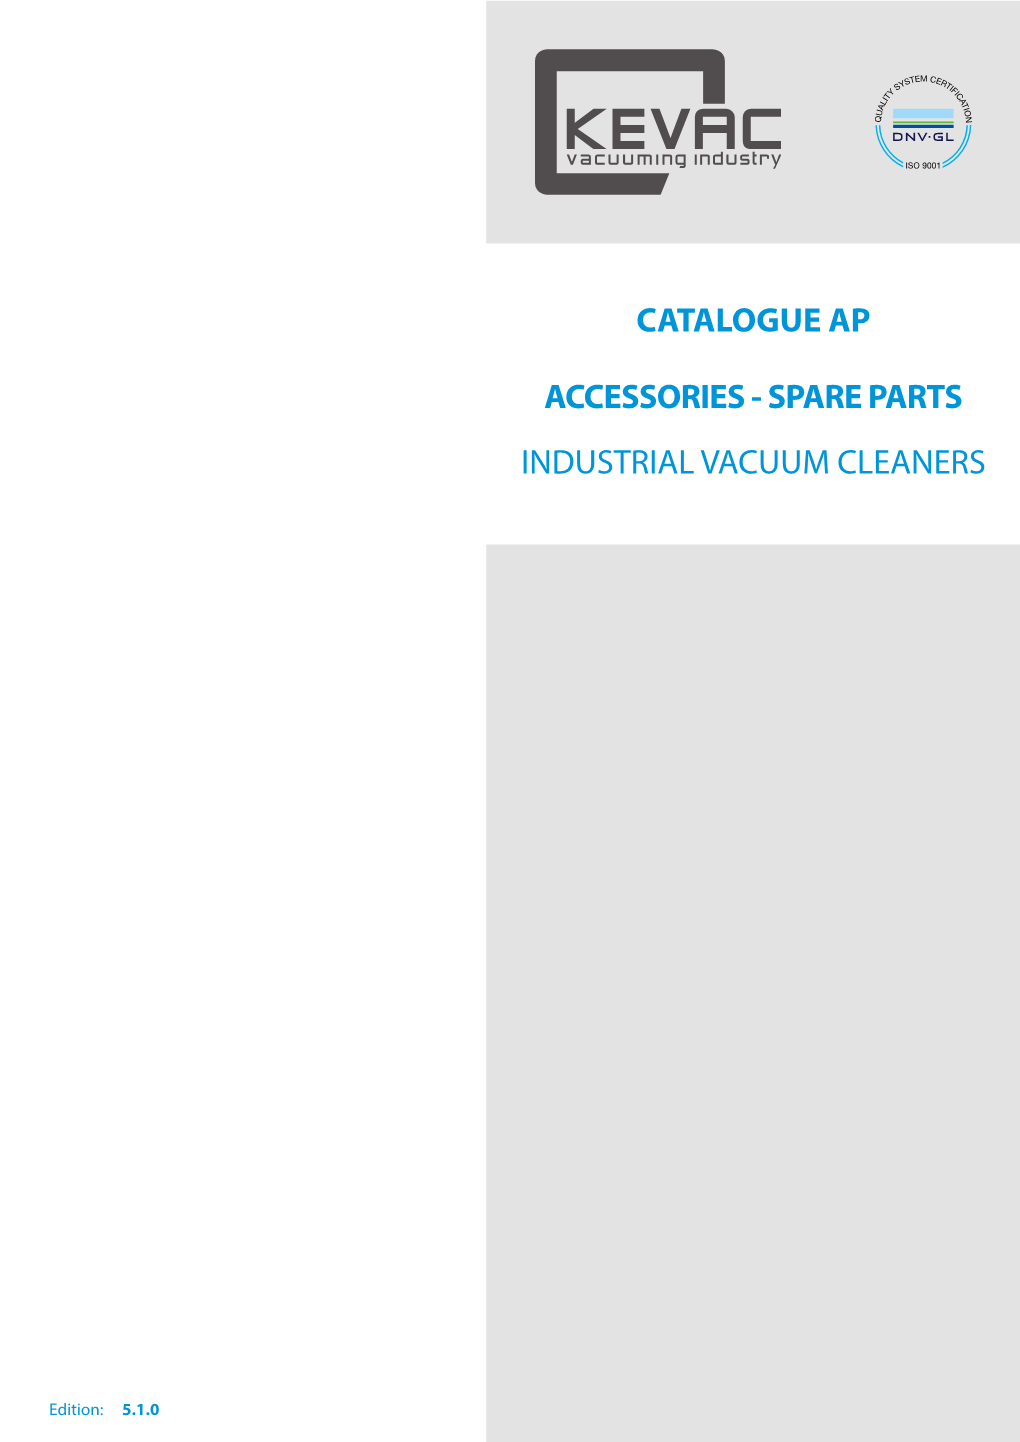 Accessories - Spare Parts Industrial Vacuum Cleaners